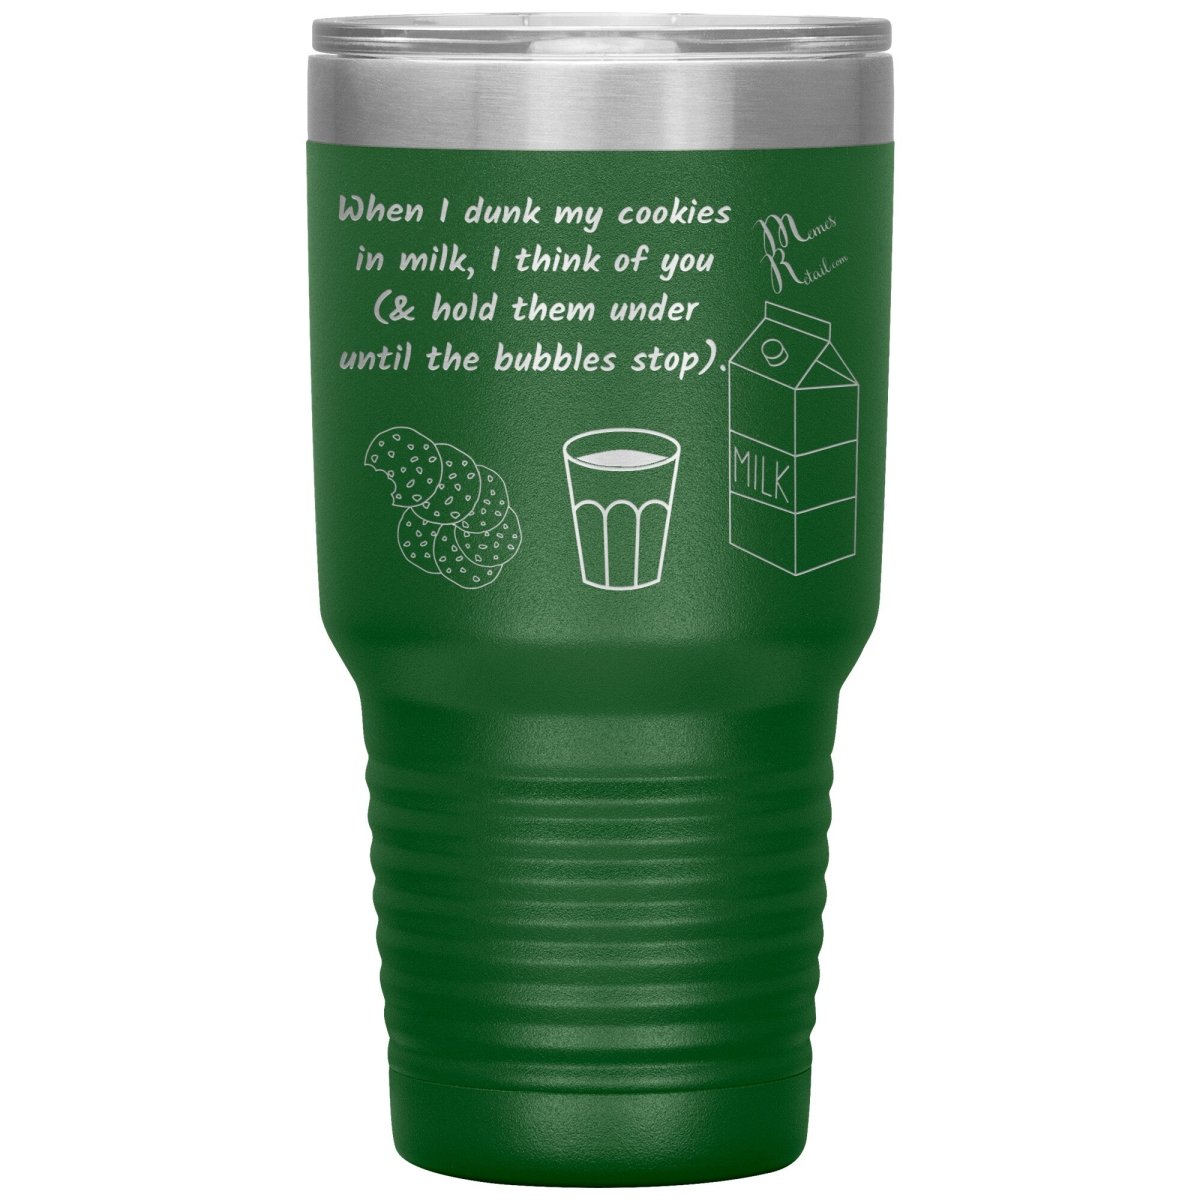 When I dunk My Cookies in Milk, I think of You - Tumblers, 30oz Insulated Tumbler / Green - MemesRetail.com